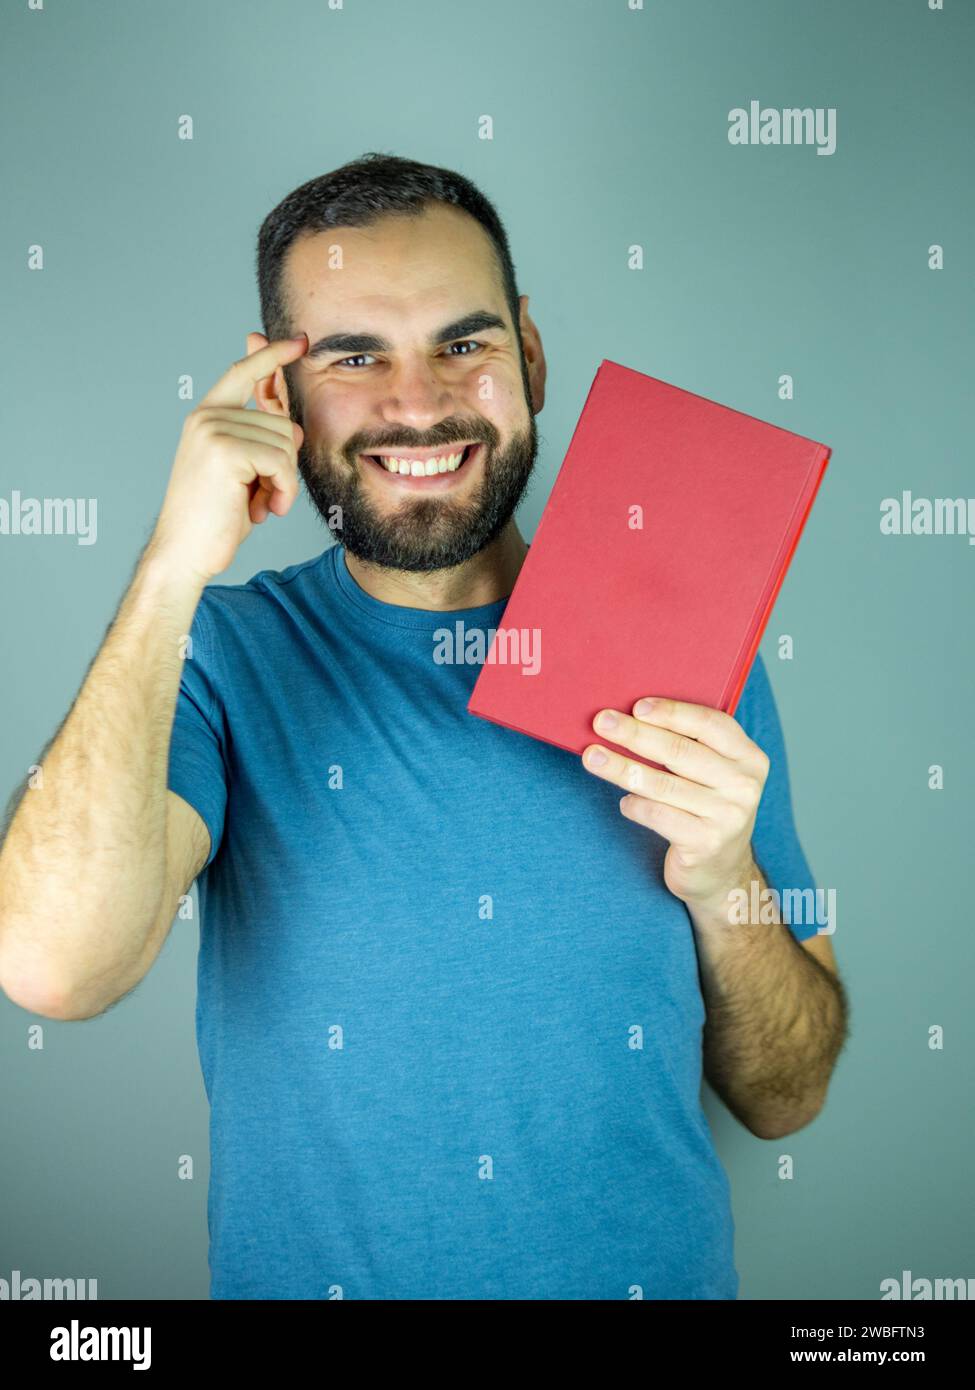 Young man pointing his head while holding a red book Looking at camera Stock Photo